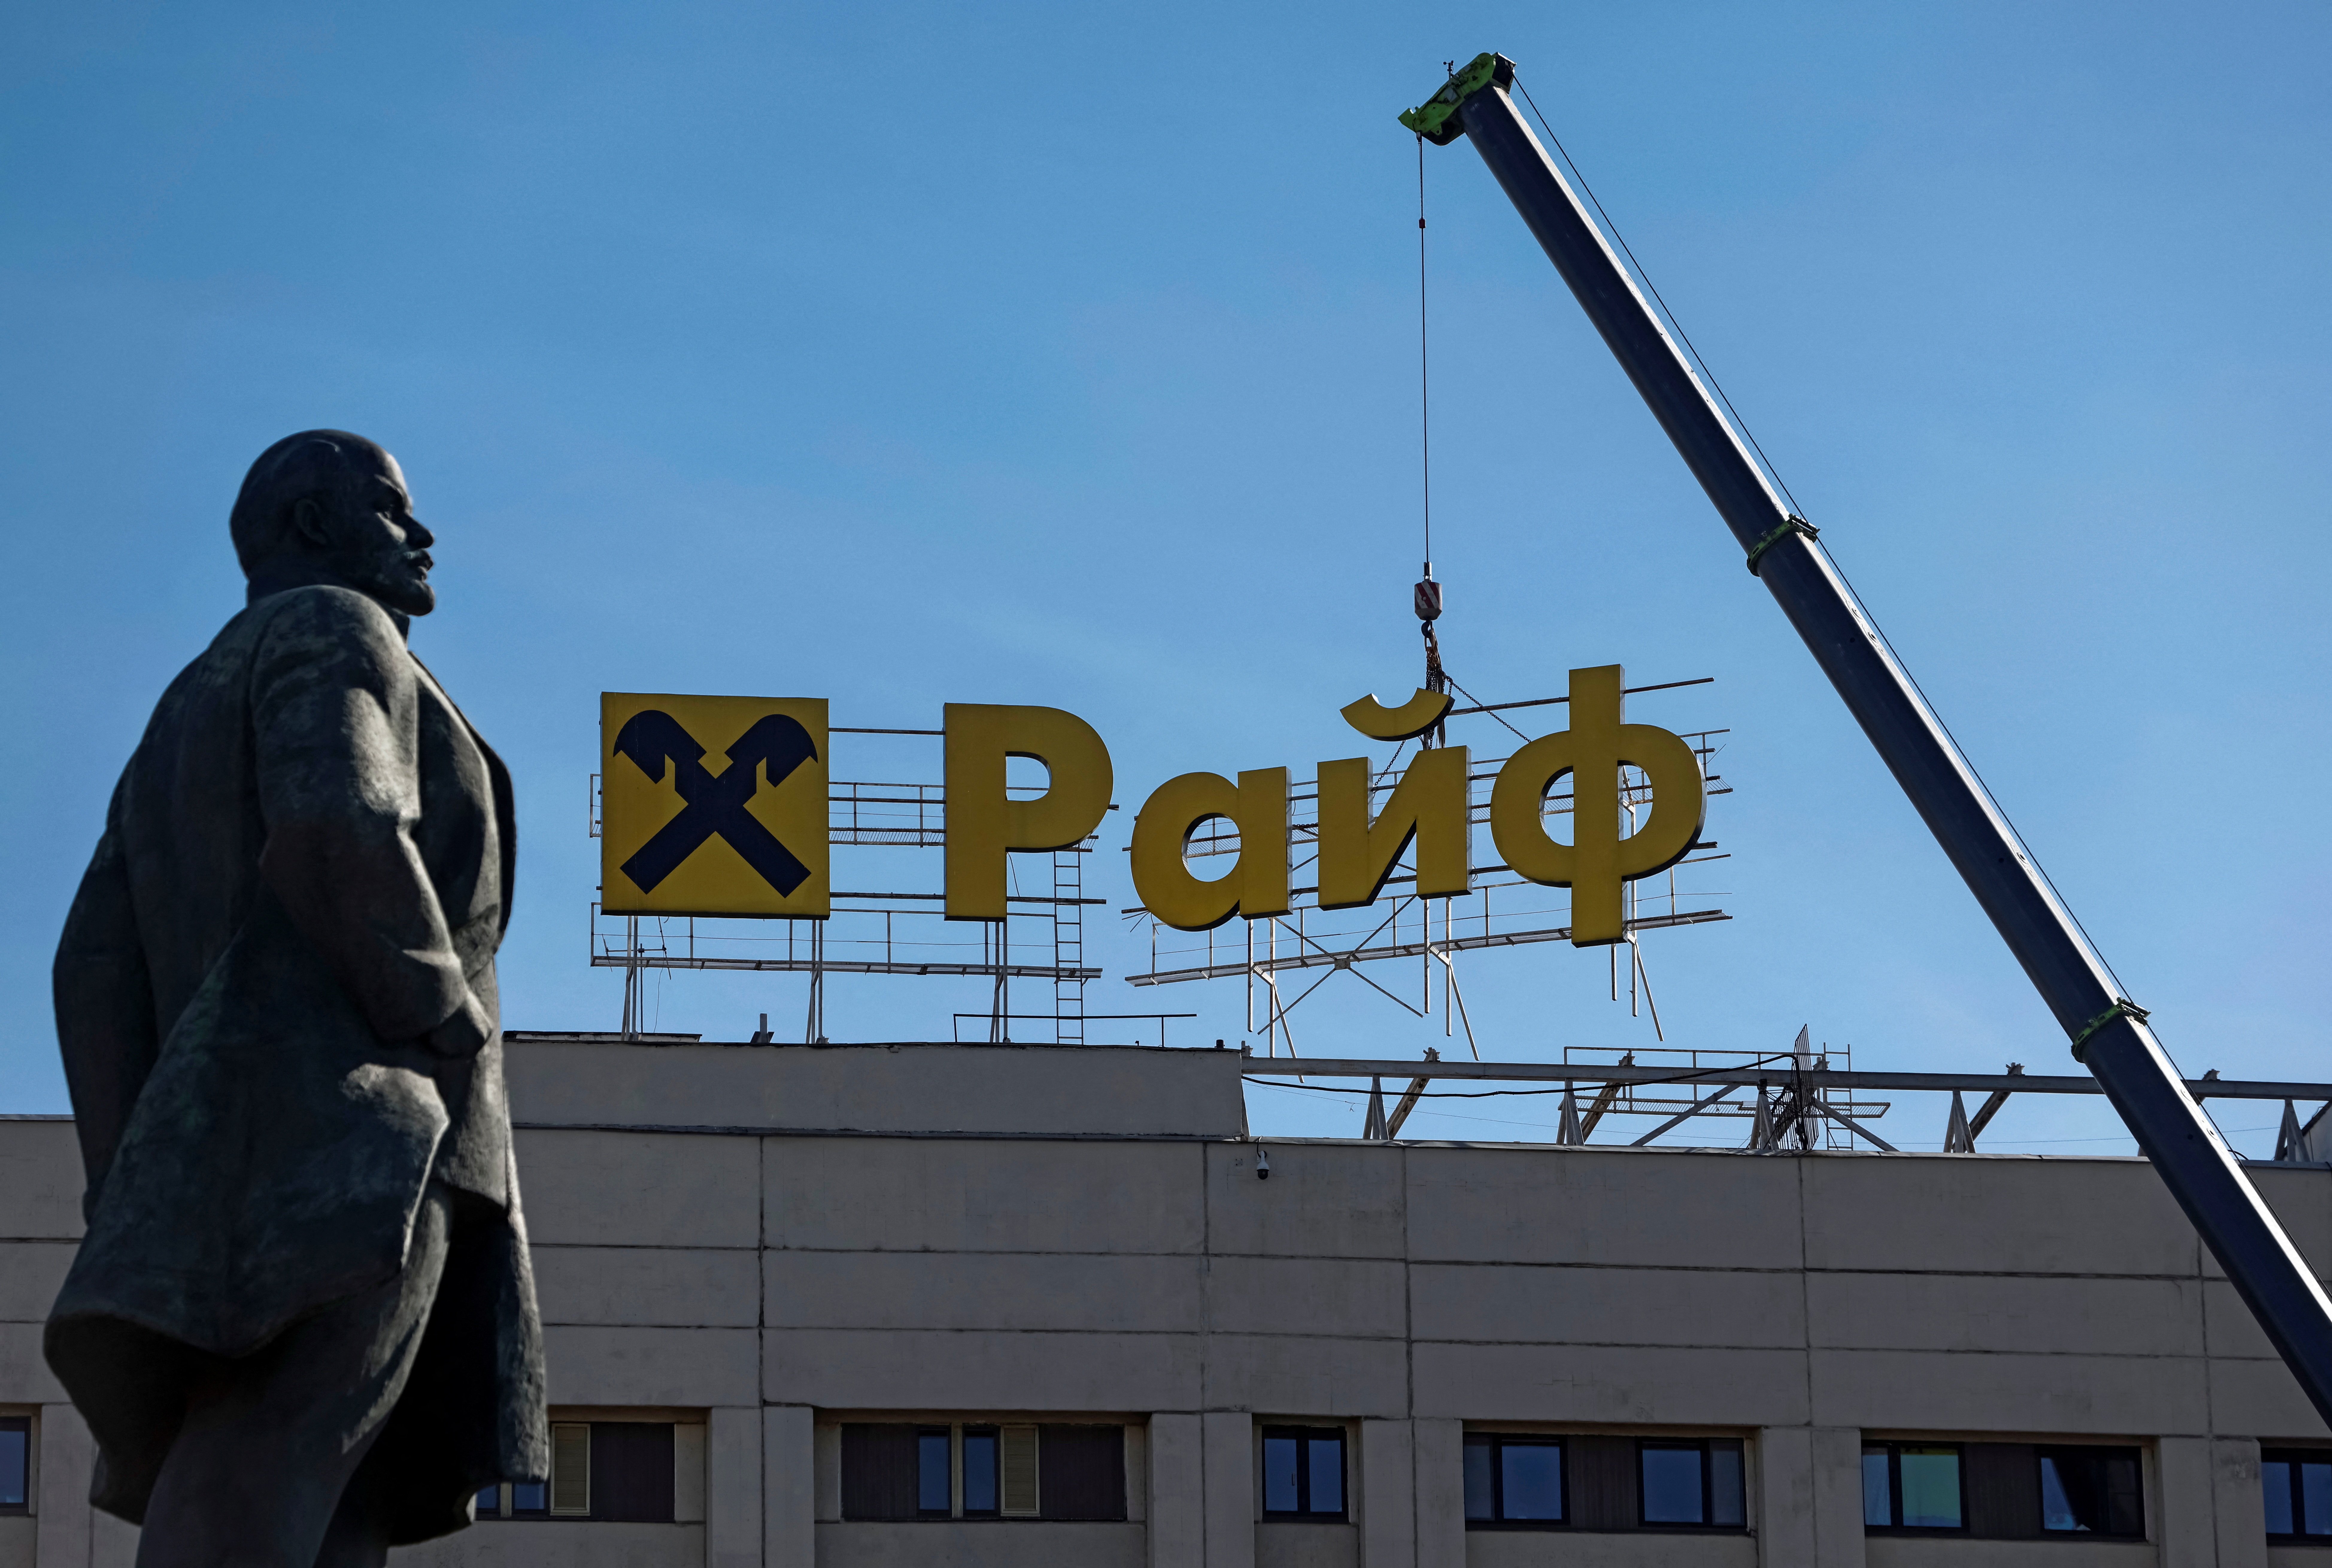 Workers use a crane to dismantle a signboard advertising Raiffeisen Bank from a building, as a monument to Soviet state founder Vladimir Lenin is seen in the foreground, in Moscow, Russia April 14, 2023. REUTERS/Maxim Shemetov